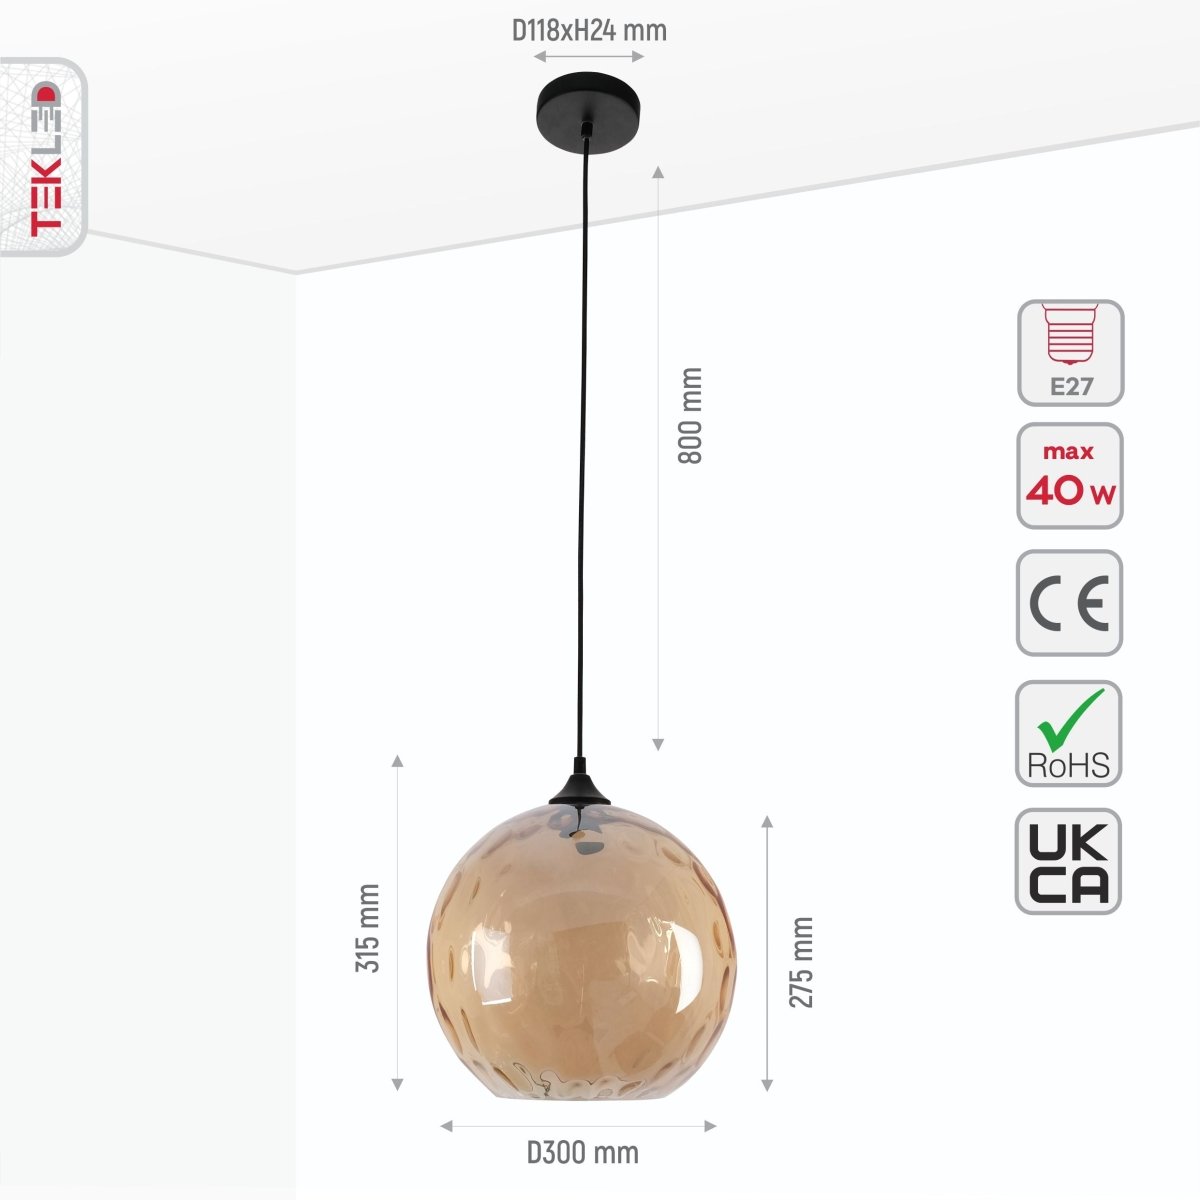 Size and specs of Amber Gold Glass Pendant Light D300 with E27 Fitting | TEKLED 158-196680